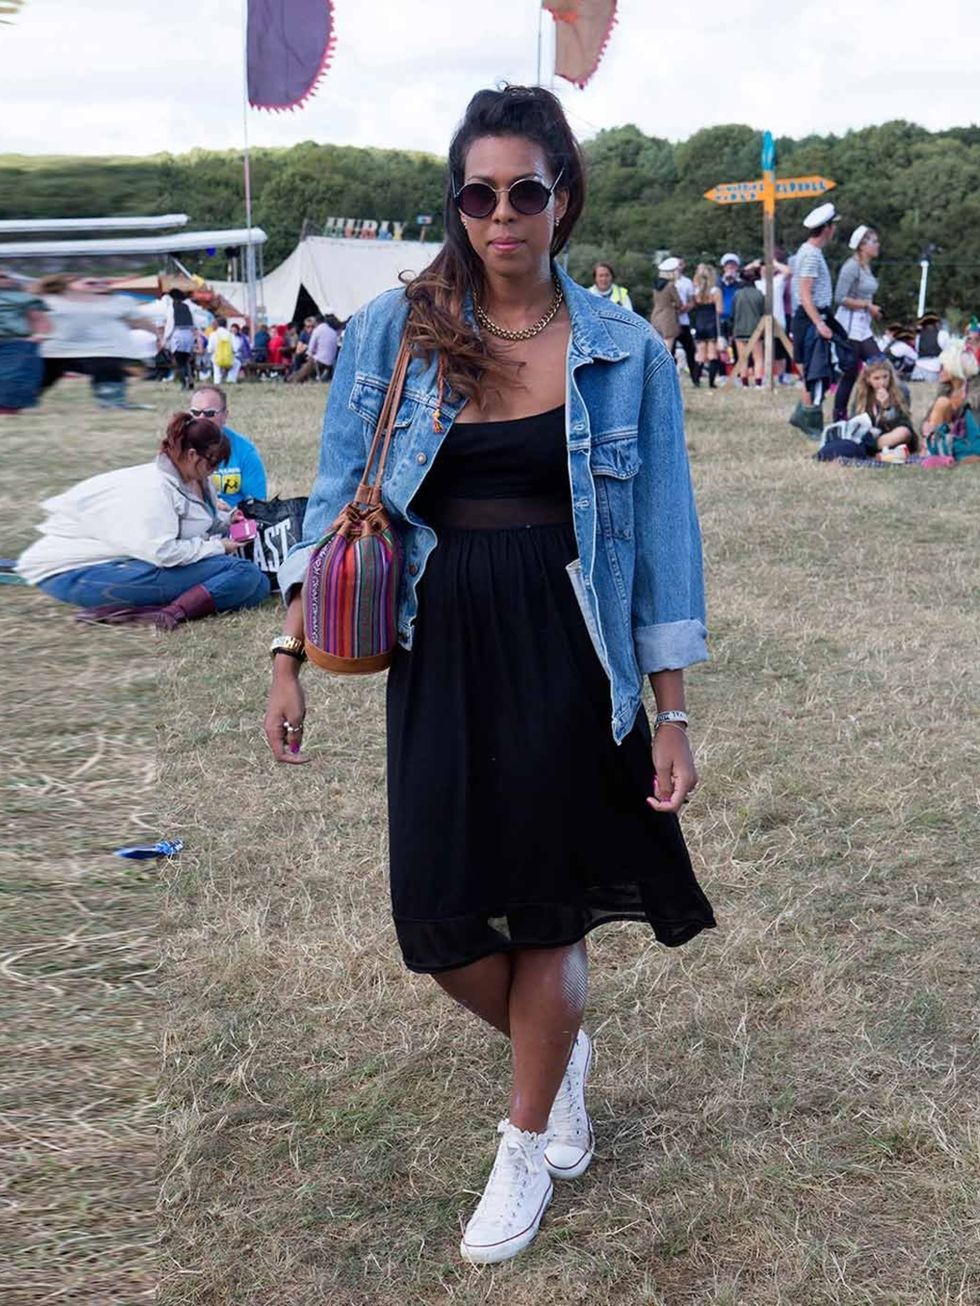 <p>Ruth Drysdale wears Levi's denim jacket, ASOS dress and Primark bag.</p><p>For other festival street style see...</p><p><a href="http://www.elleuk.com/style/street-style/secret-garden-party-street-style-2013">Secret Garden Party Street Style</a></p><p>